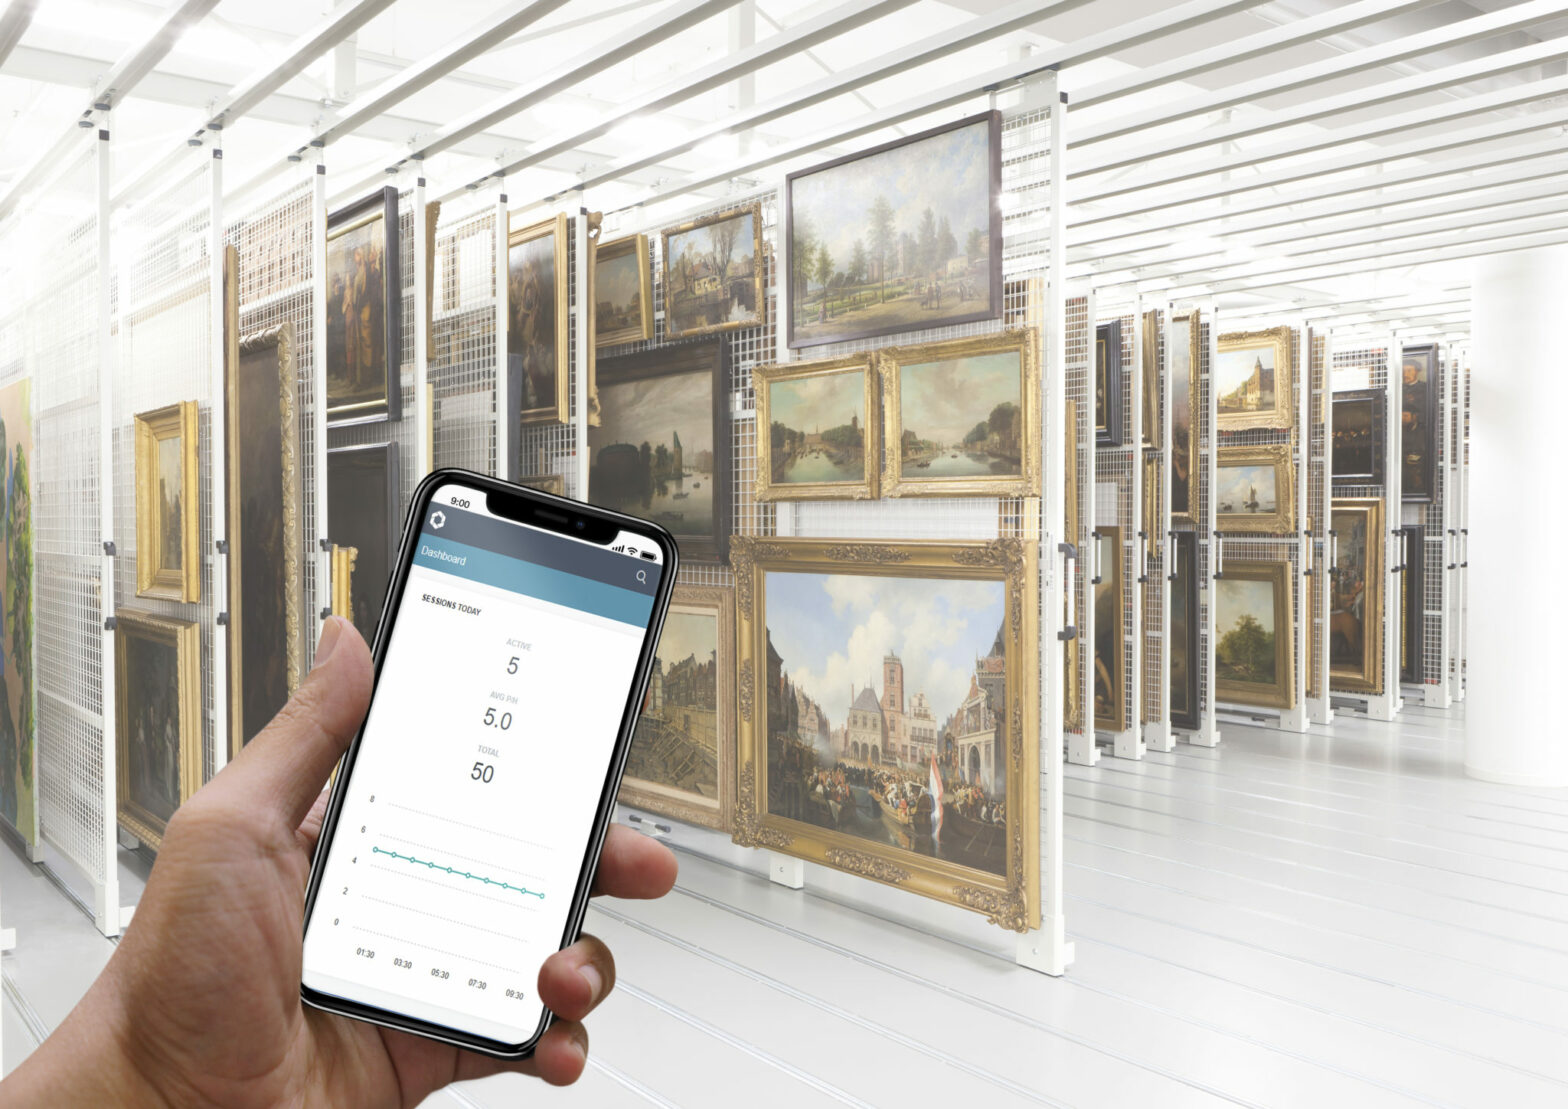 A collection of stacked paintings in the background with a mobile phone in the foreground dispalying some statistics about the gallery.